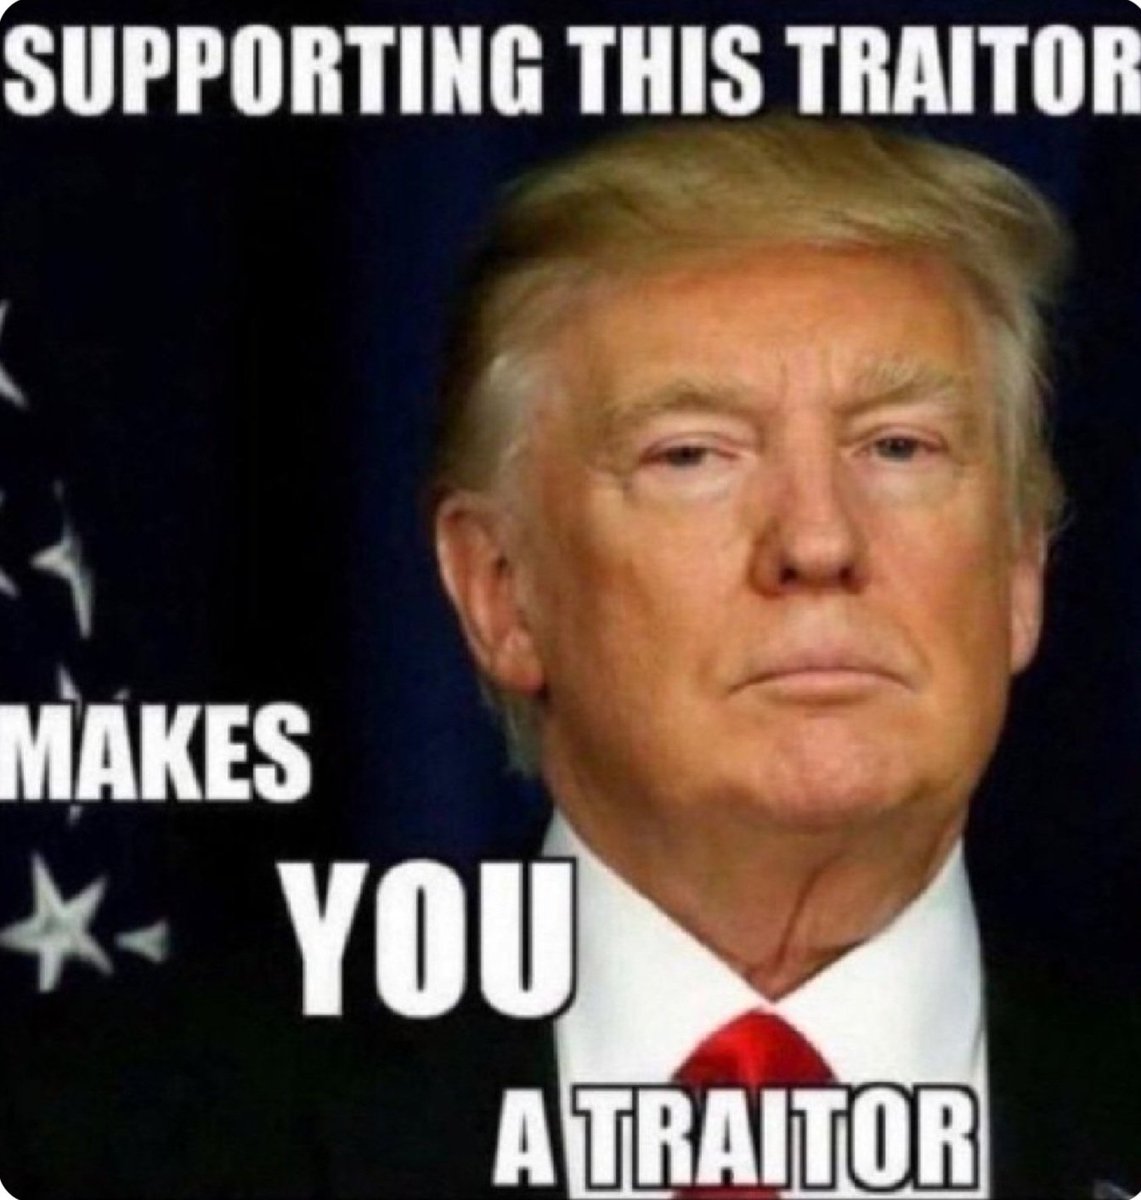 The People's President is not this traitor. #TrumpForPrison2024